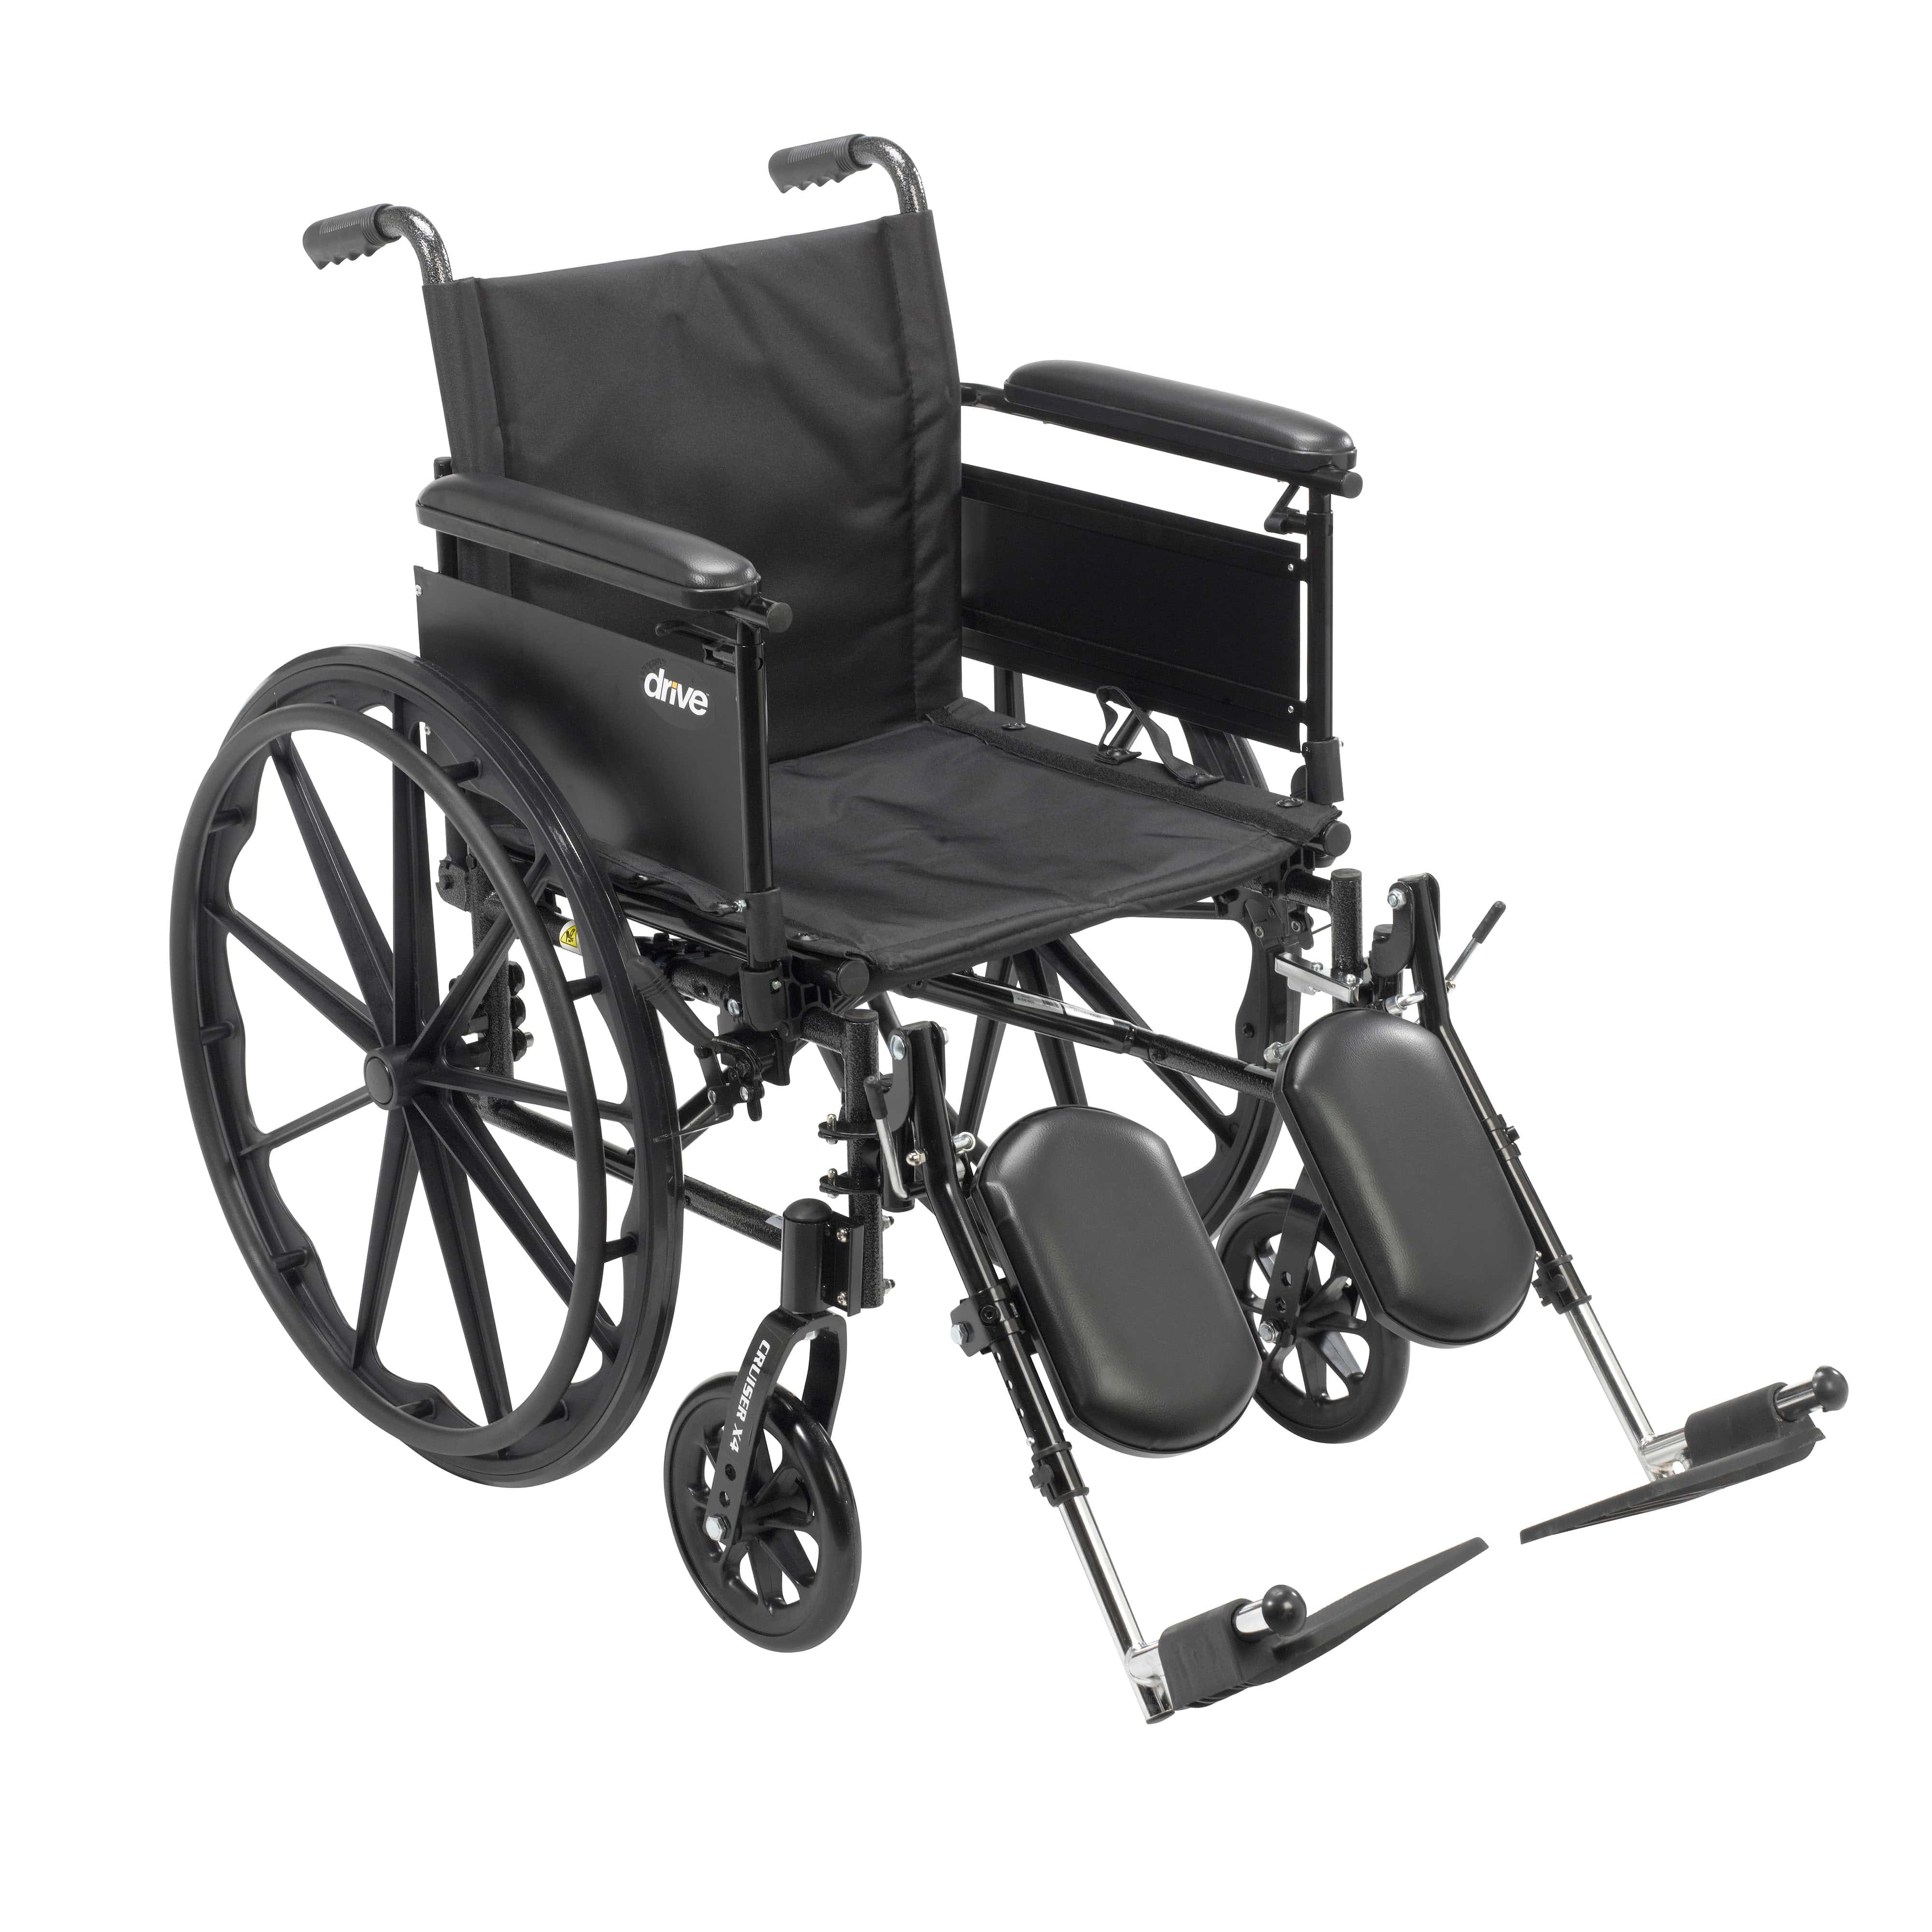 Drive Medical Wheelchairs/Lightweight Wheelchairs Full Arms / Elevating Leg Rests / 20" Seat Drive Medical Cruiser X4 Lightweight Dual Axle Wheelchair with Adjustable Detatchable Arms